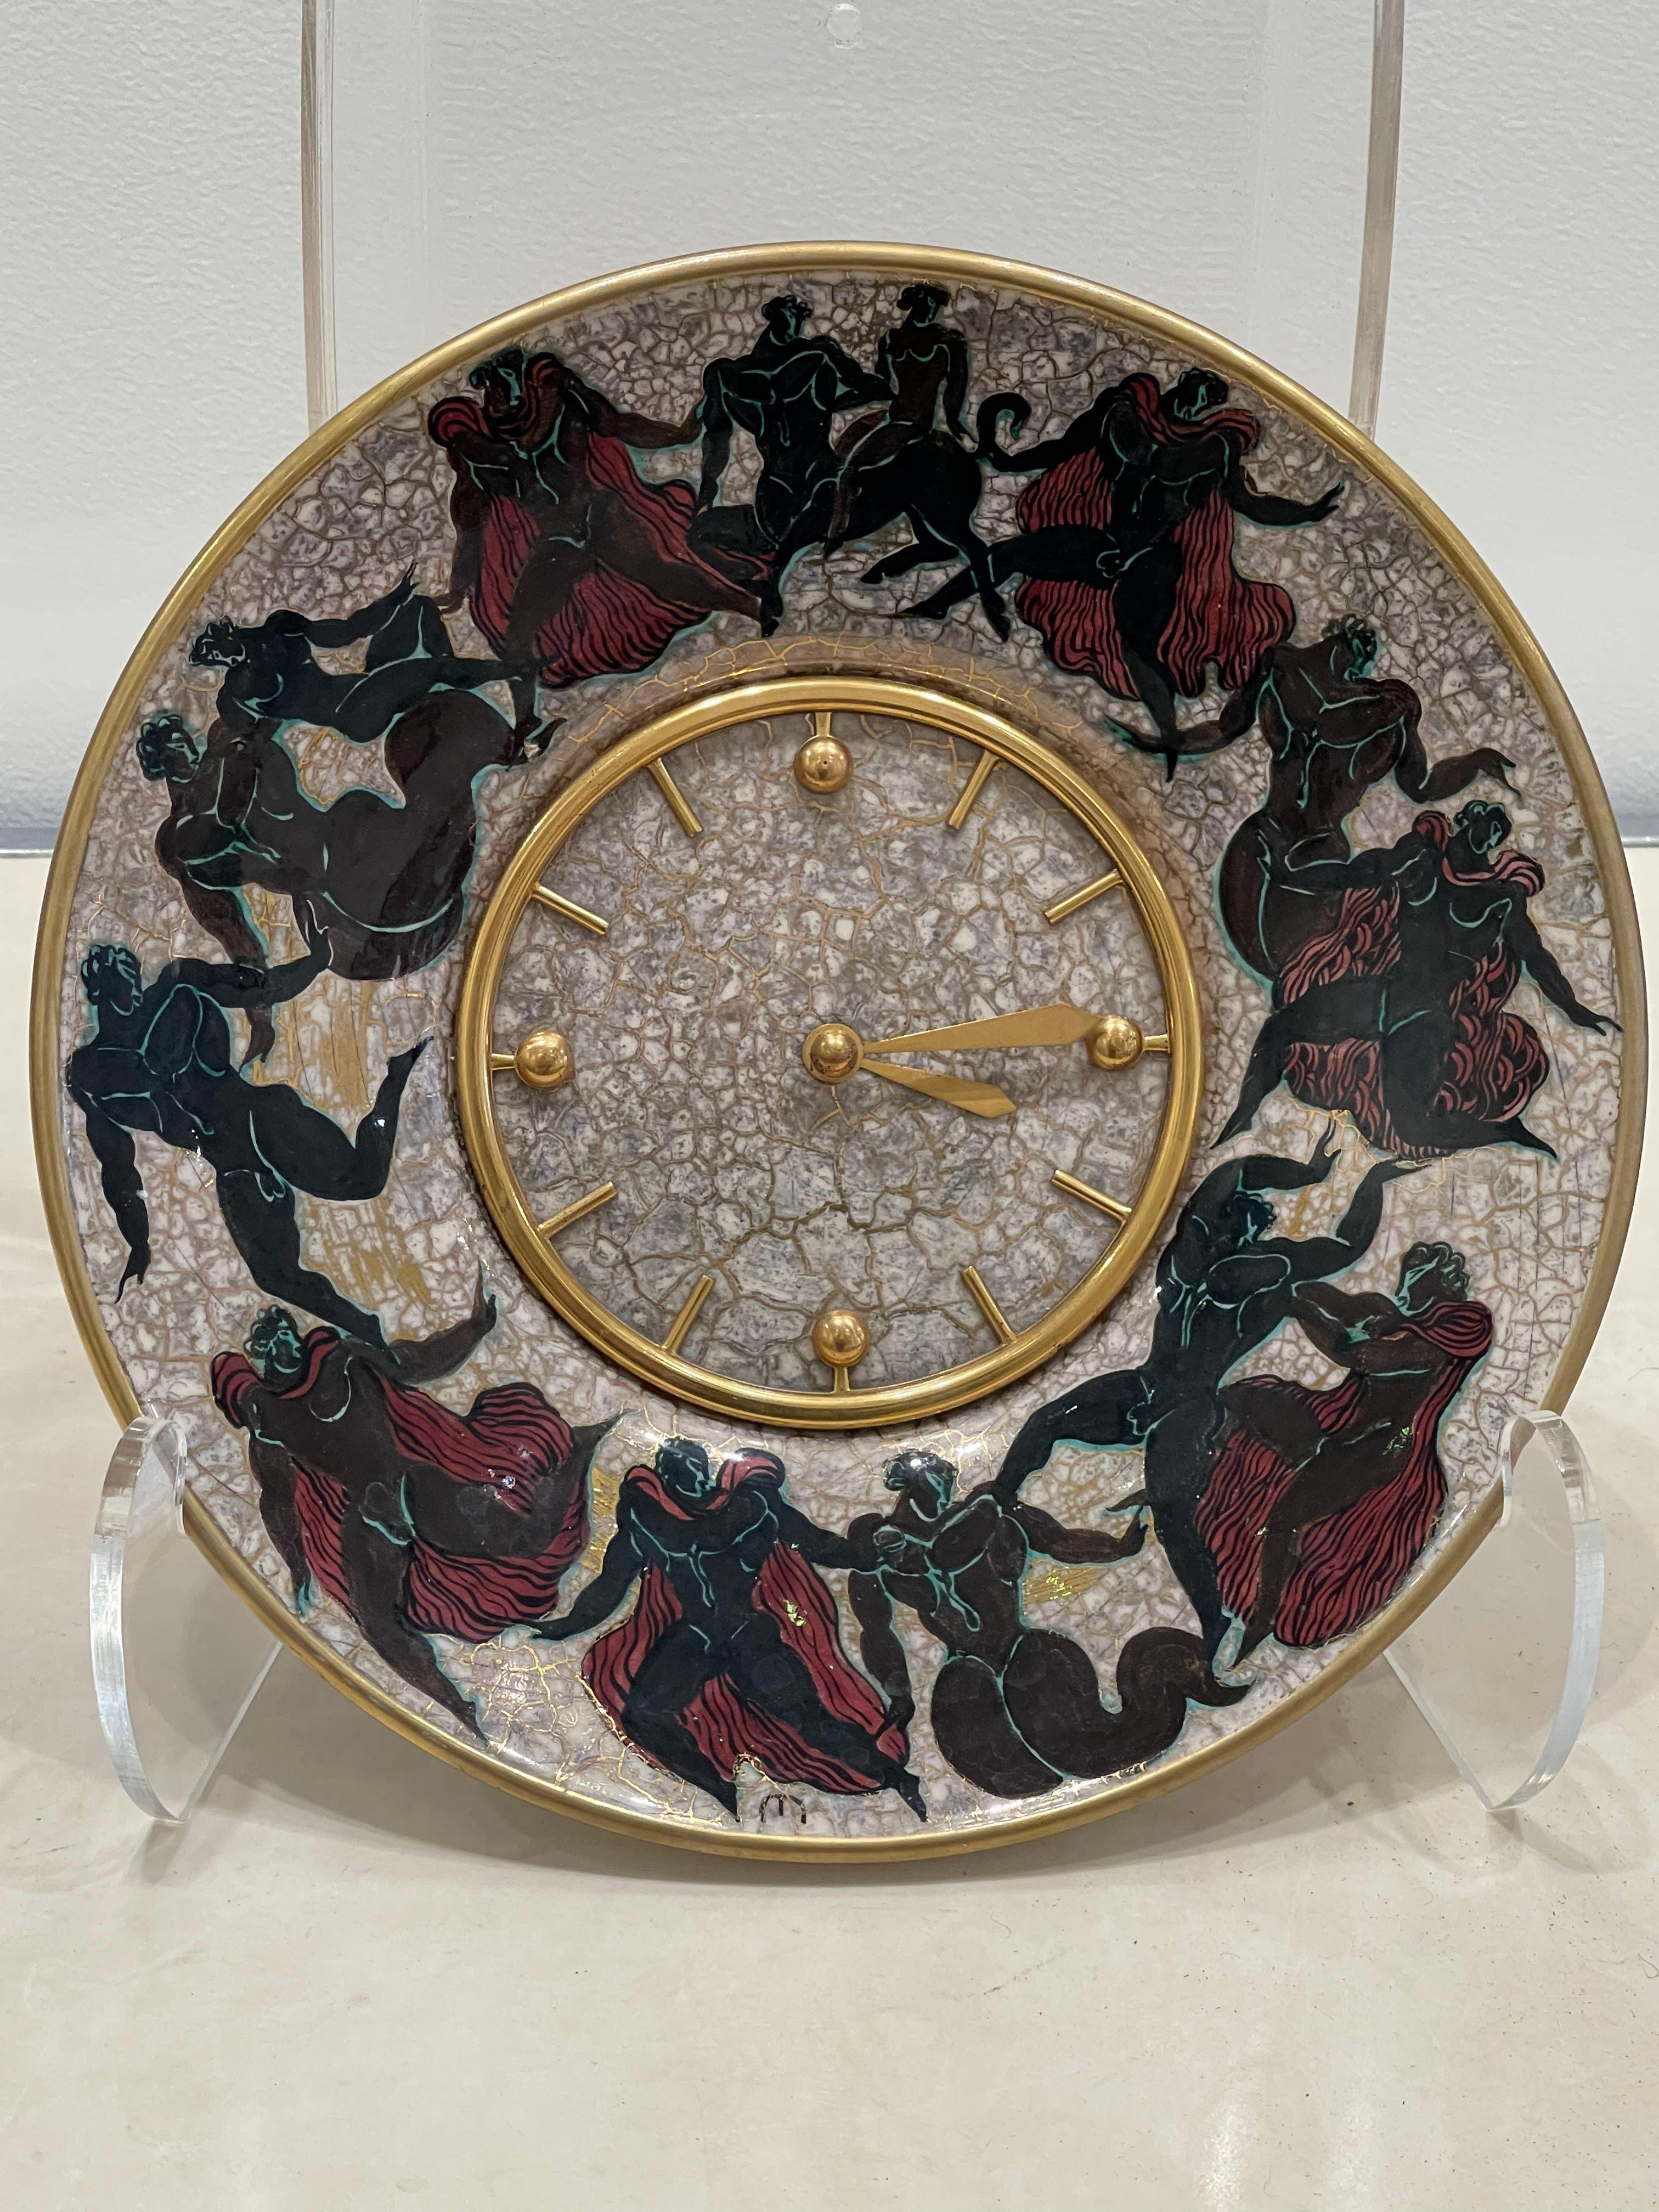 Stunning clock by famous  clockmaker Hour Lavigne and ceramist Jean Léon Mayodon (1893-1967)

This clock is made of a central  clock by Hour Lavigne mounted on a plate realized by J.L. Mayodon. This clock is designed to be mounted on a wall but can